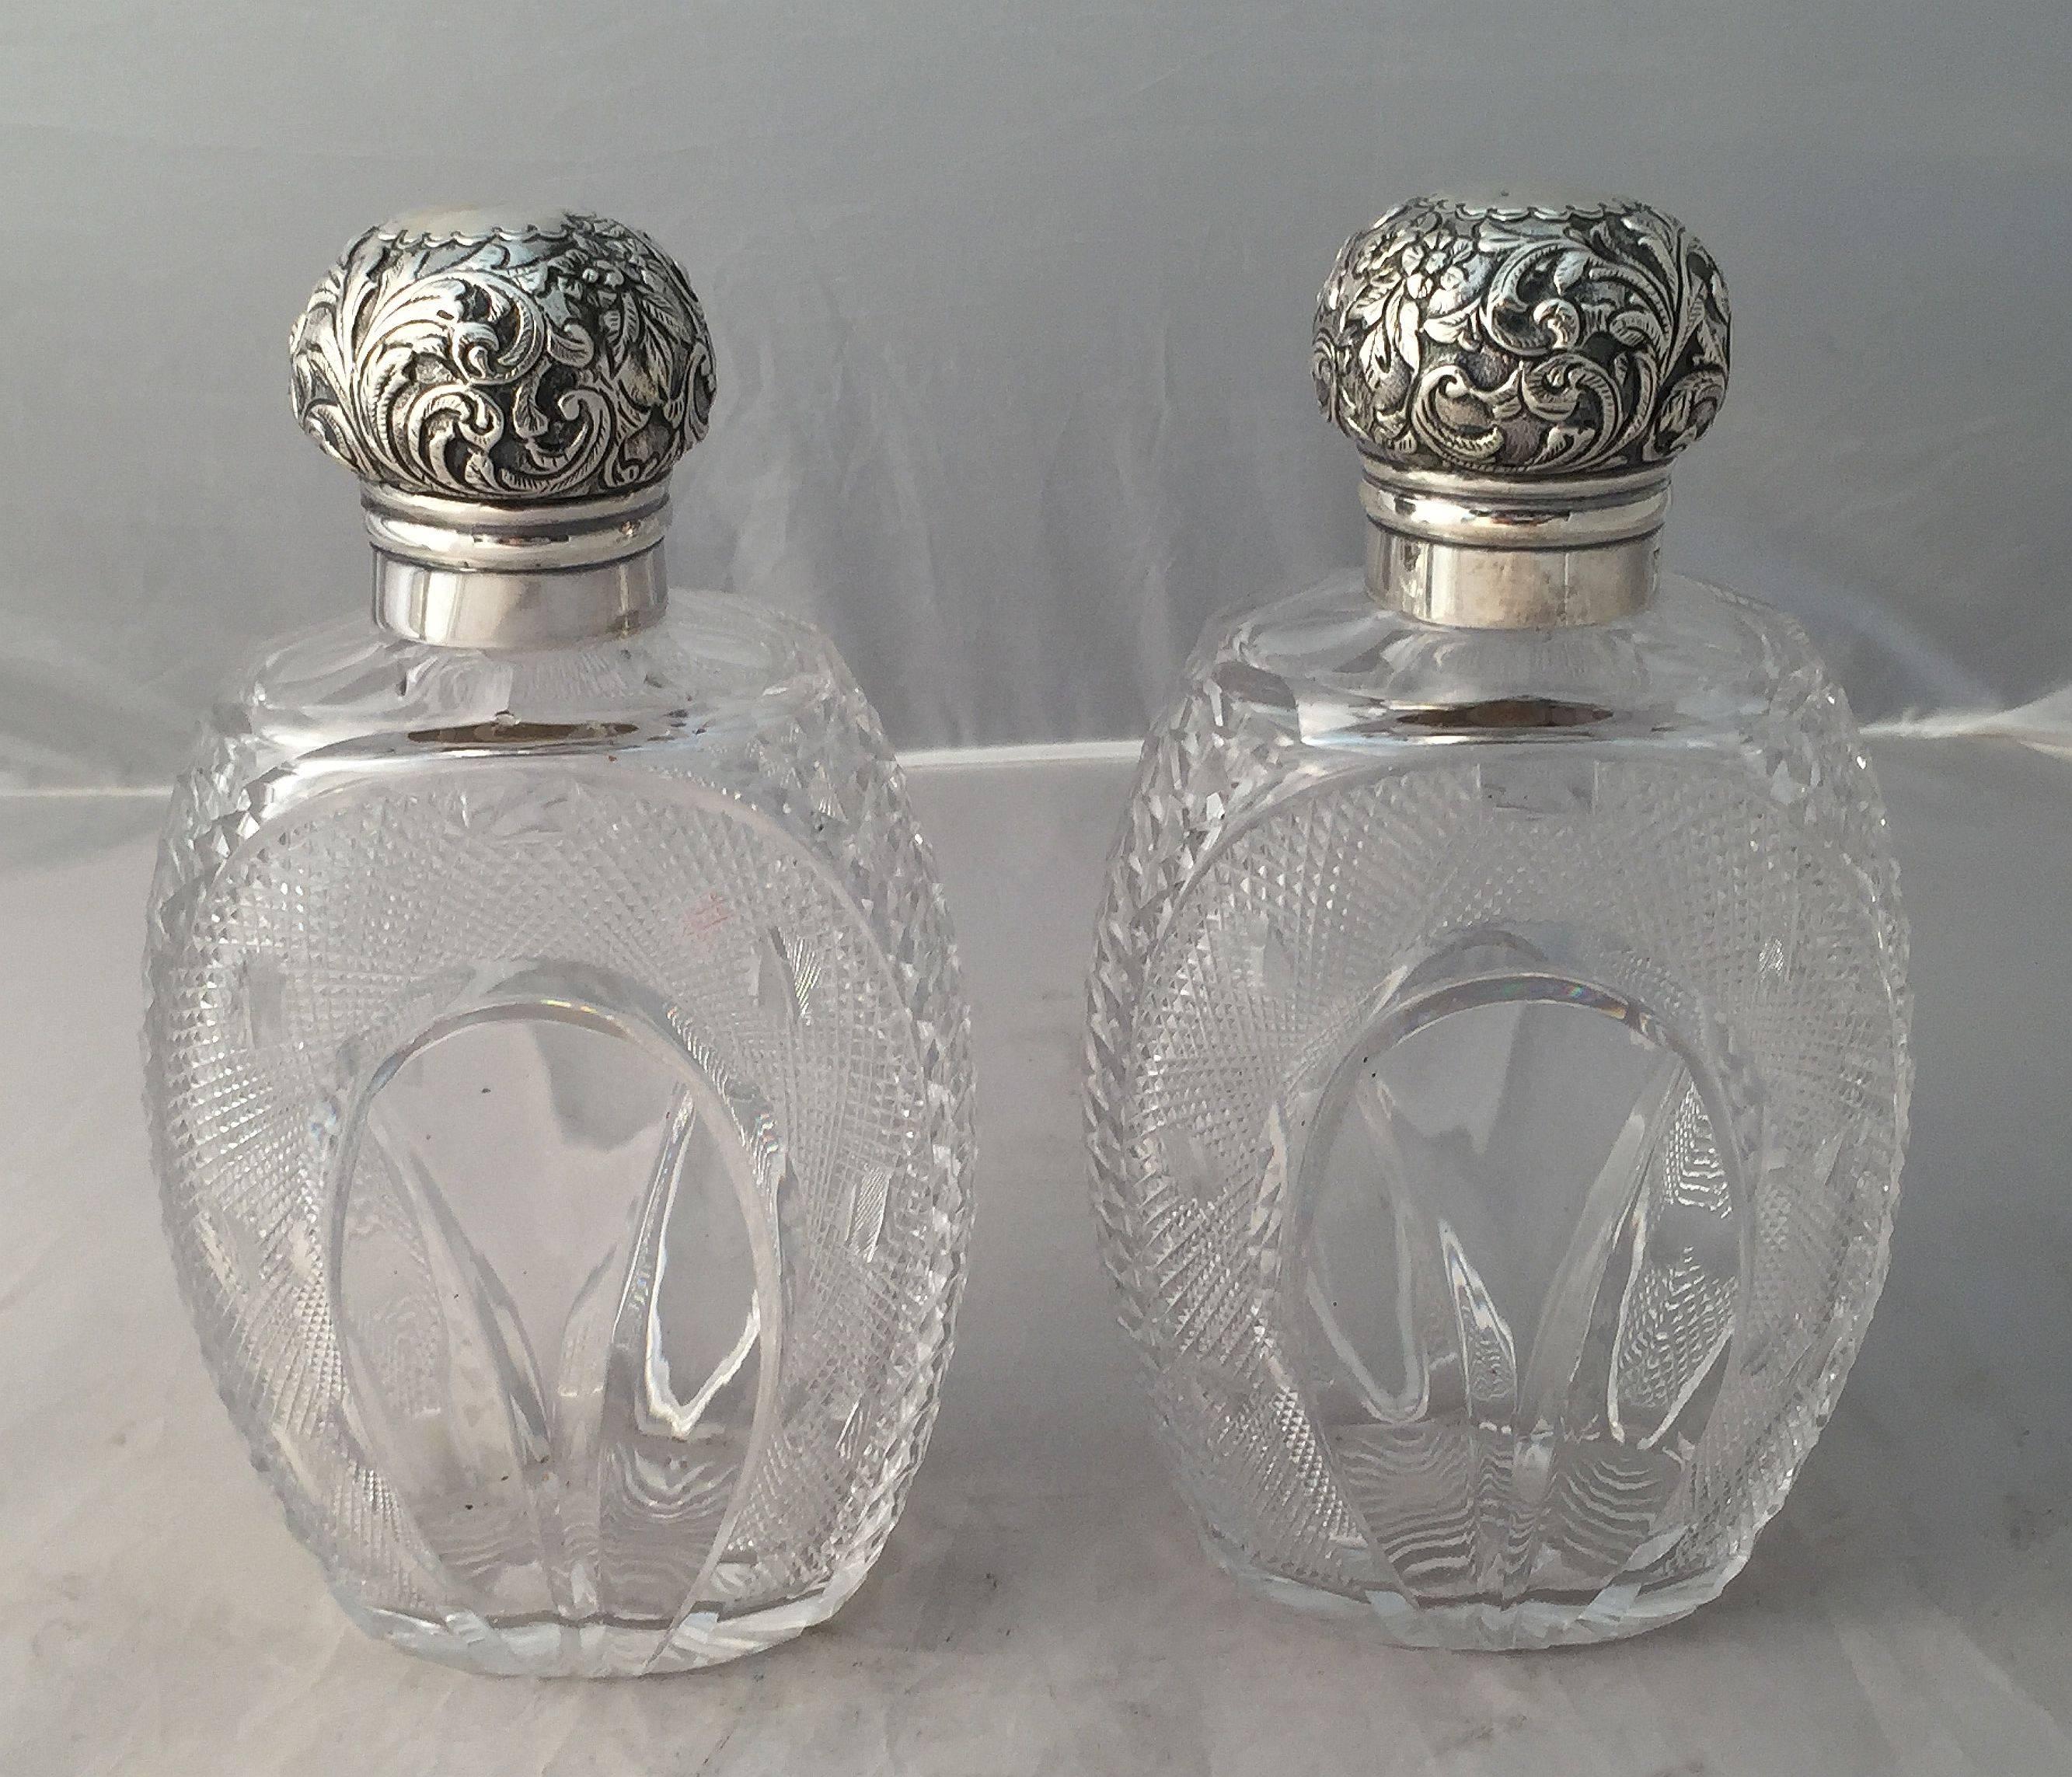 A fine pair of large English cut crystal bottles or decanters with sterling silver tops, each bottle featuring a chased foliate cap with hallmarks for London, circa 1889, over a finely cut crystal ovoid body.

Two available, priced individually,